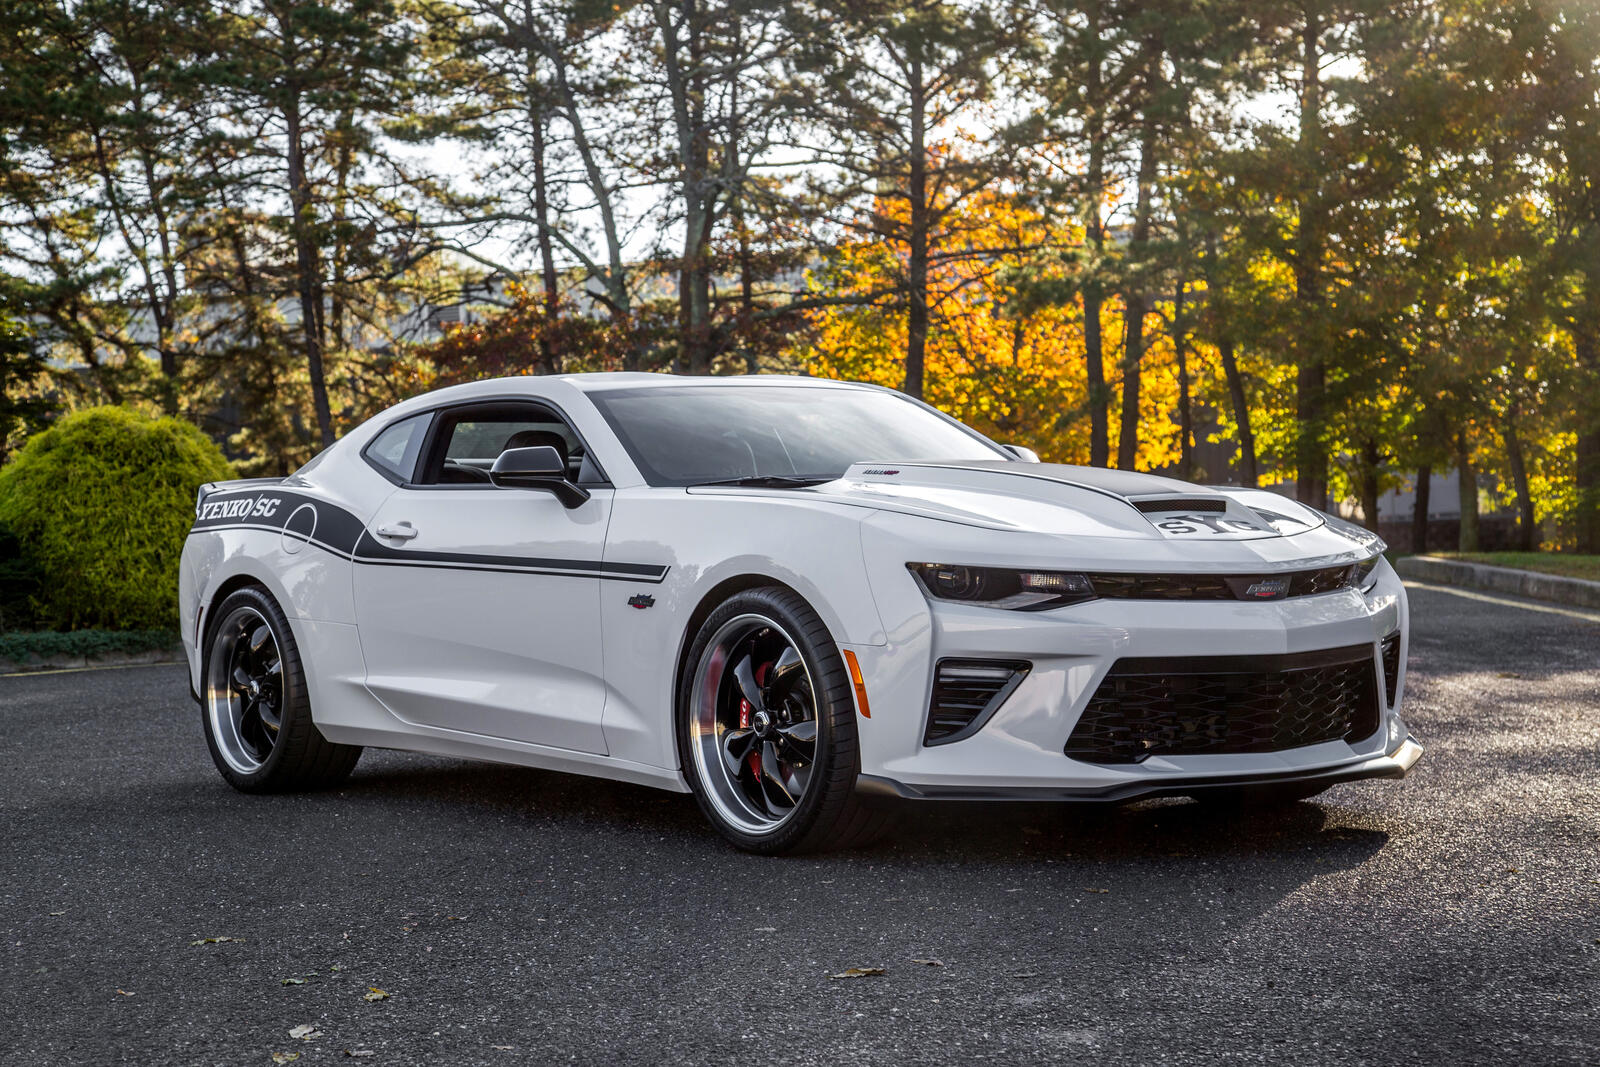 Wallpapers cars Chevrolet Camaro 2018 cars on the desktop